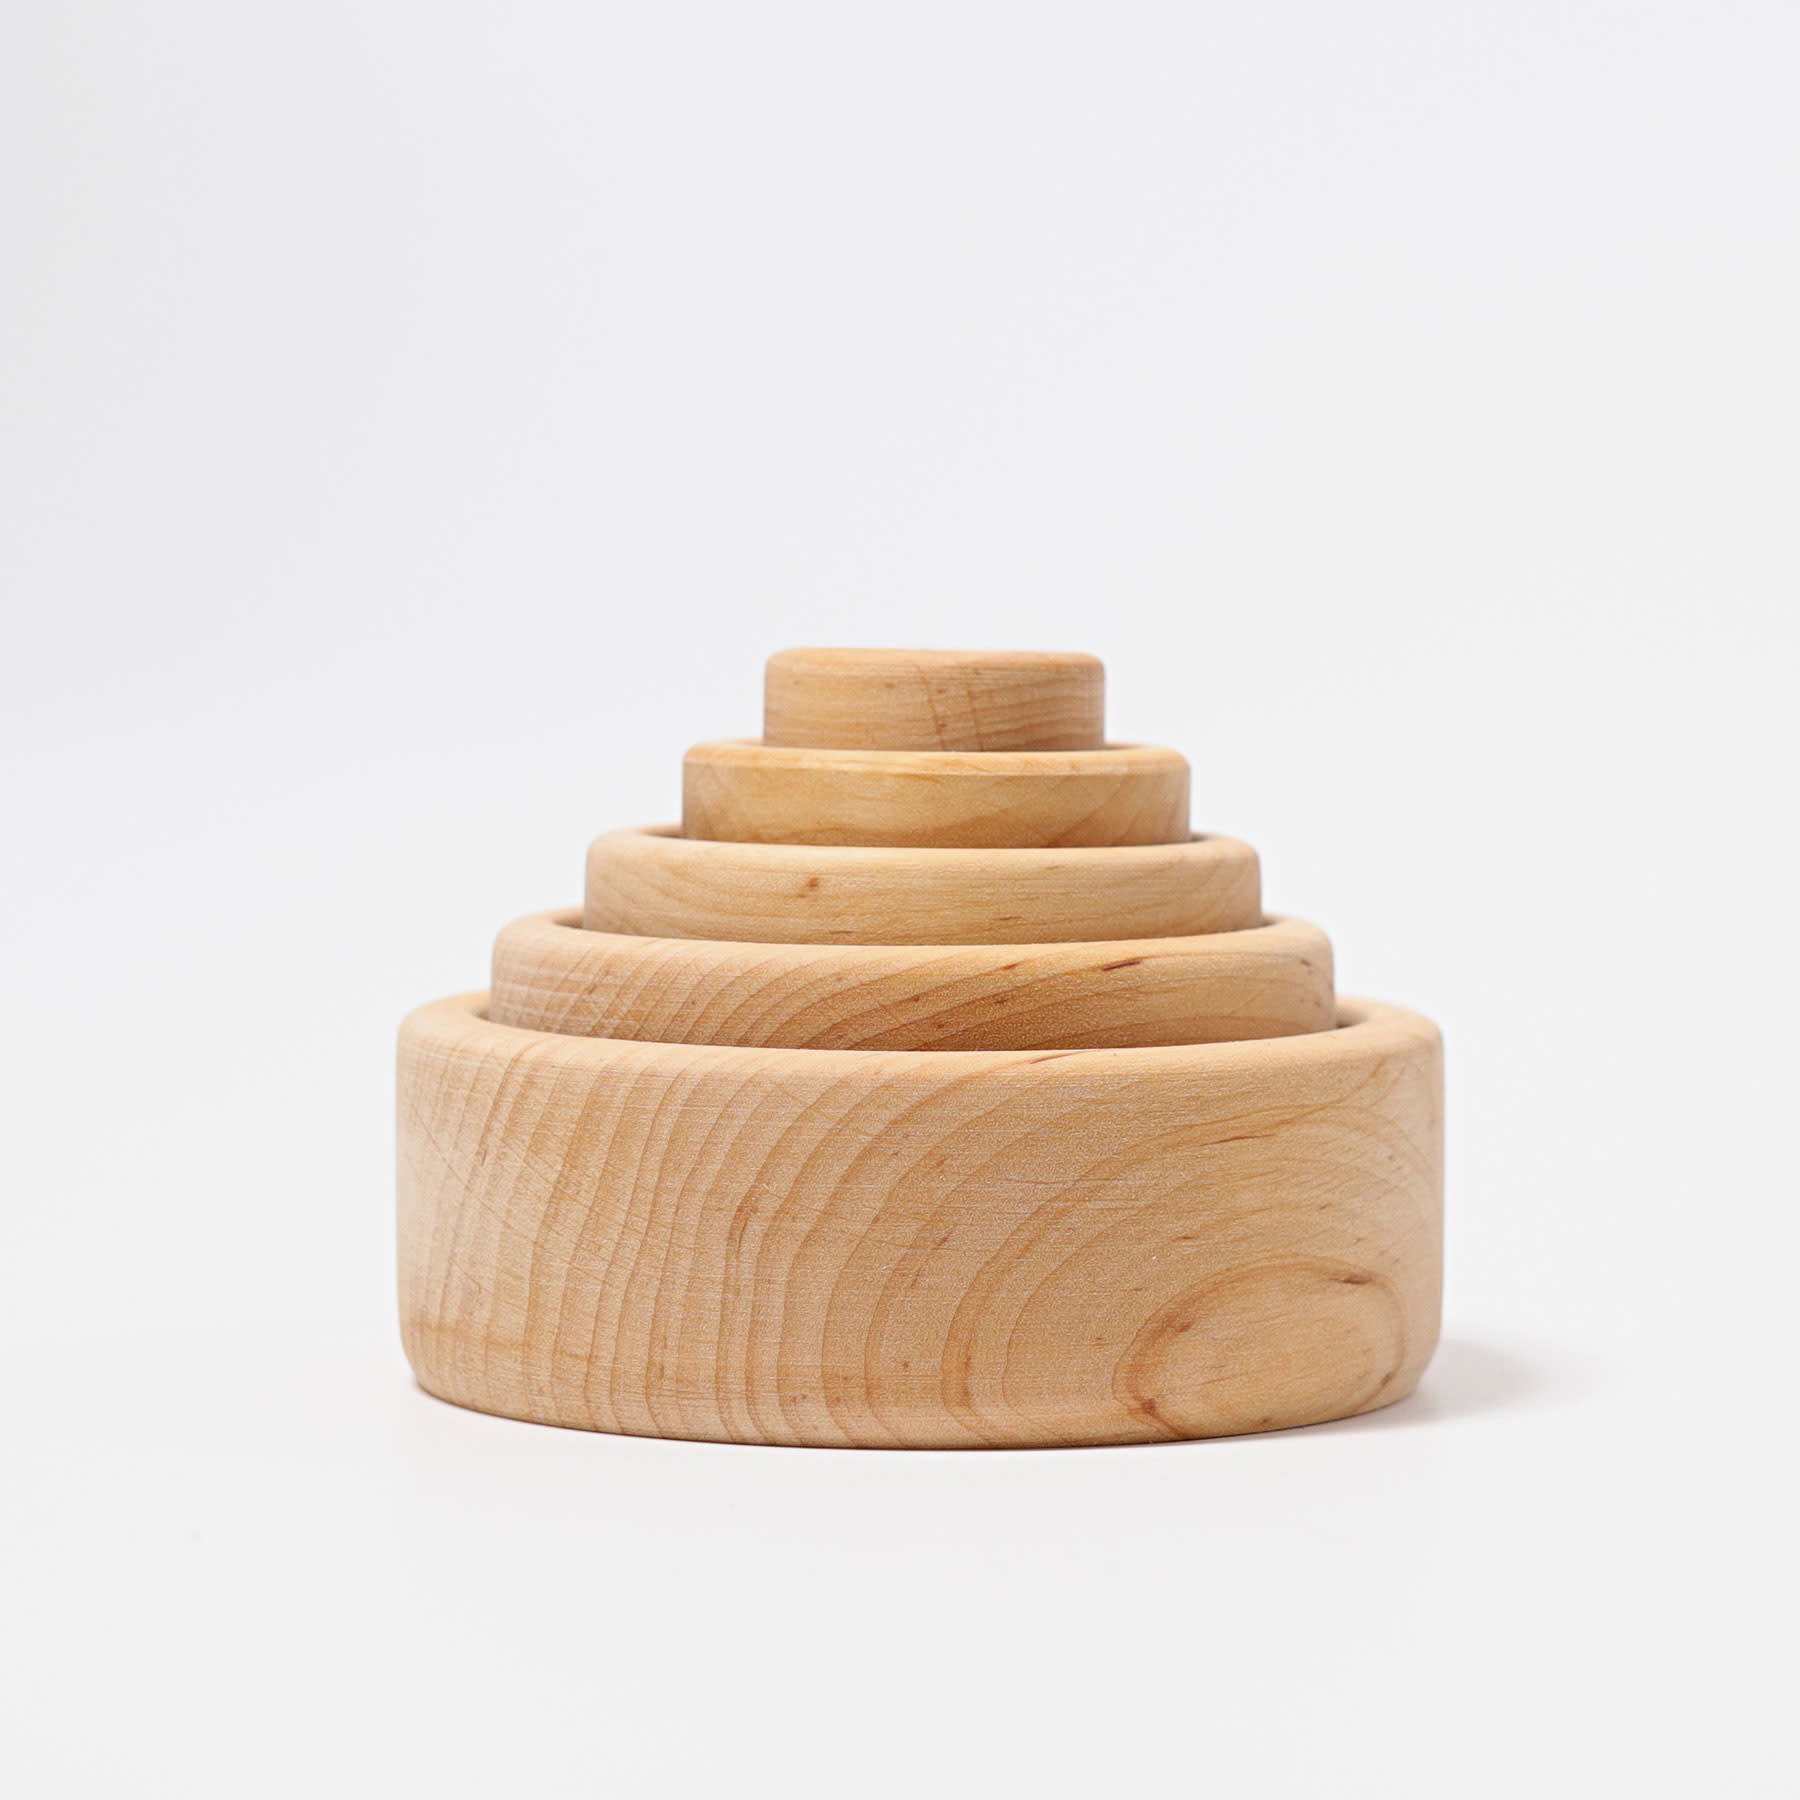 Grimm's Toys Set of 5 Stacking Wooden Bowls - Natural - 4"